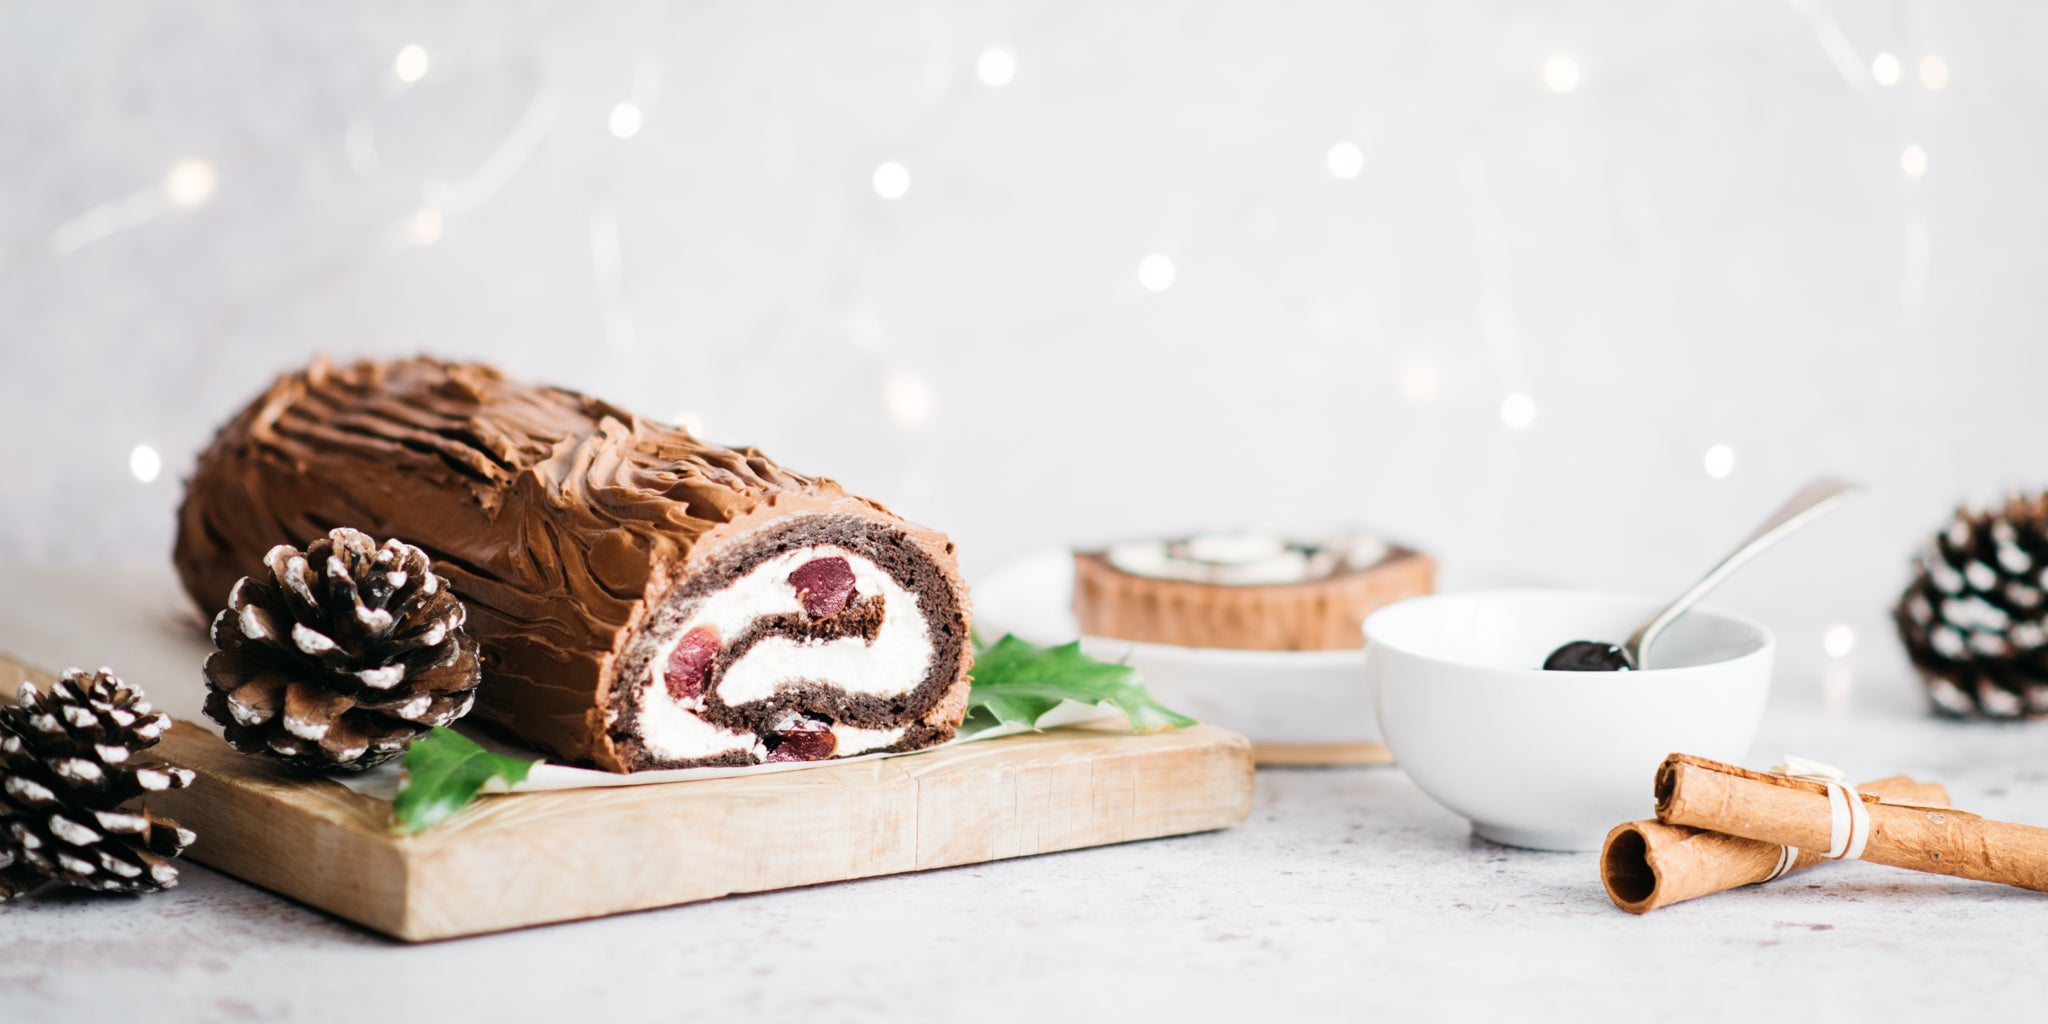 Black forest yule log on wooden board with ingredients and white bowl surrounding it